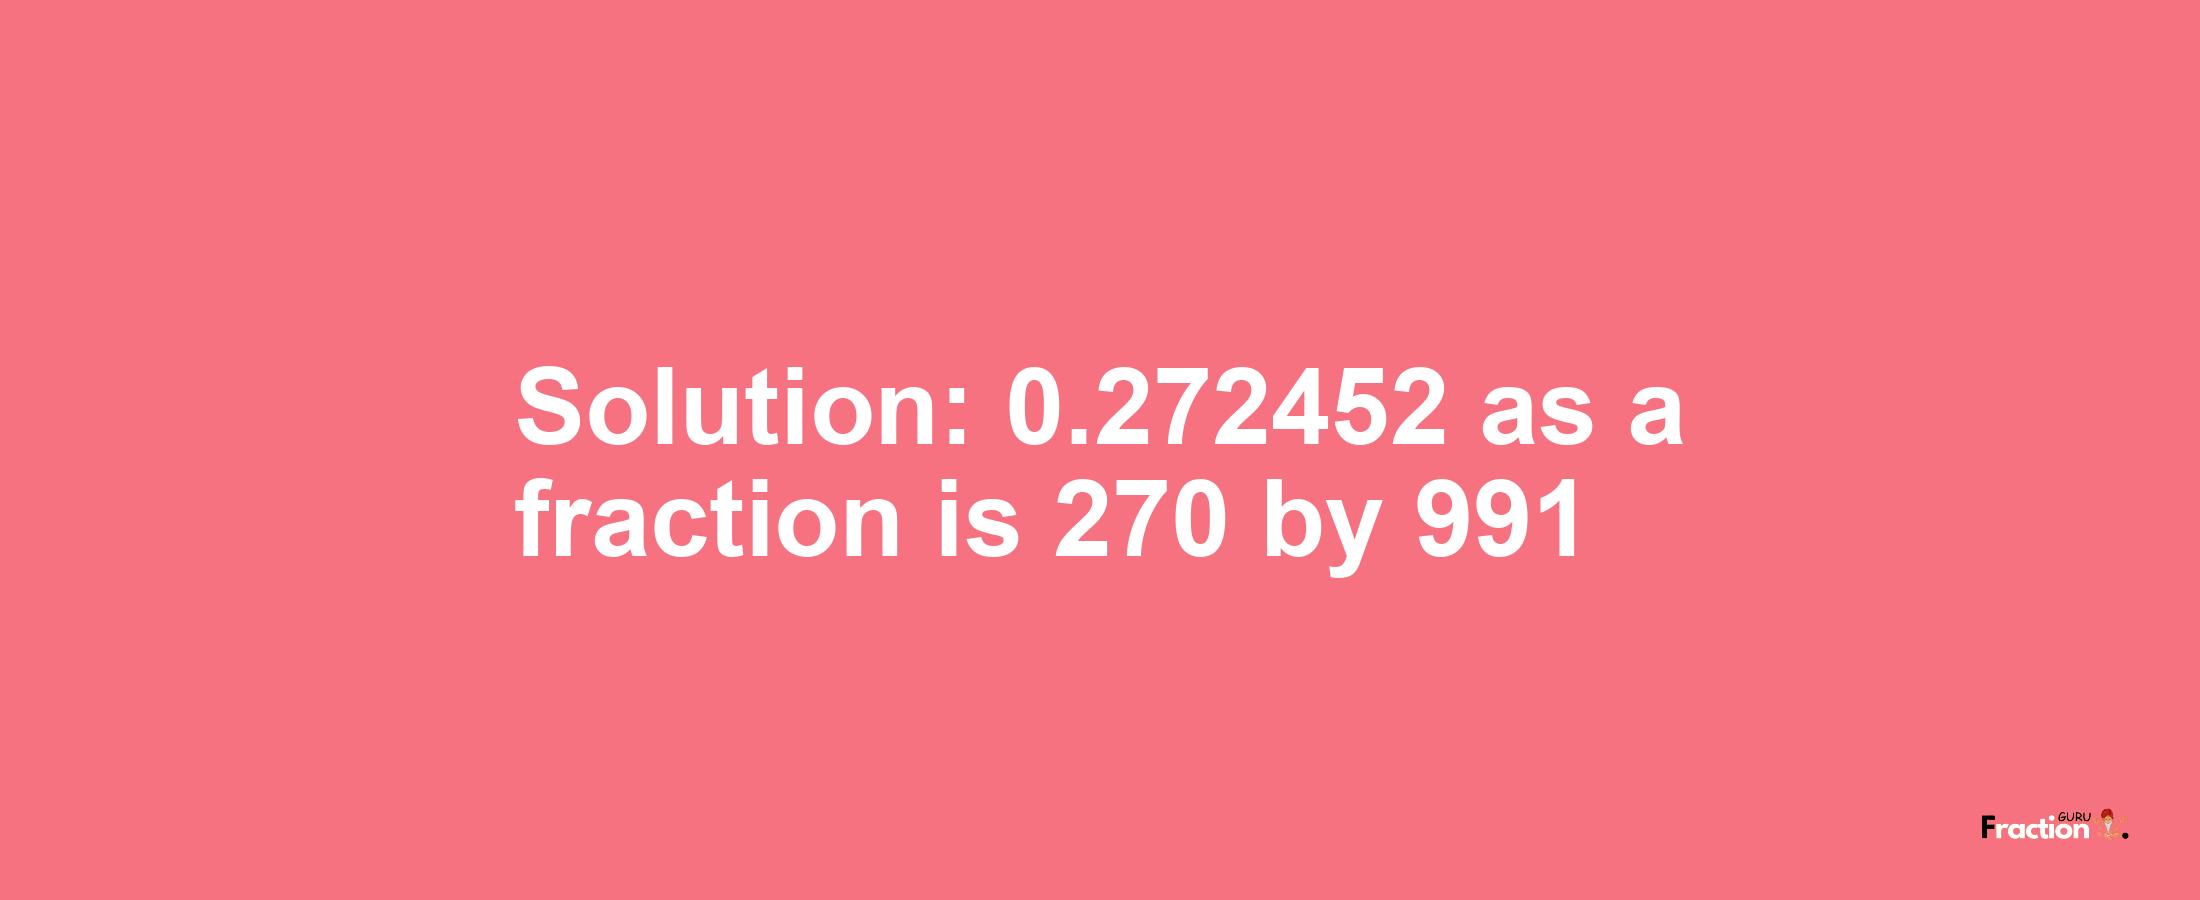 Solution:0.272452 as a fraction is 270/991